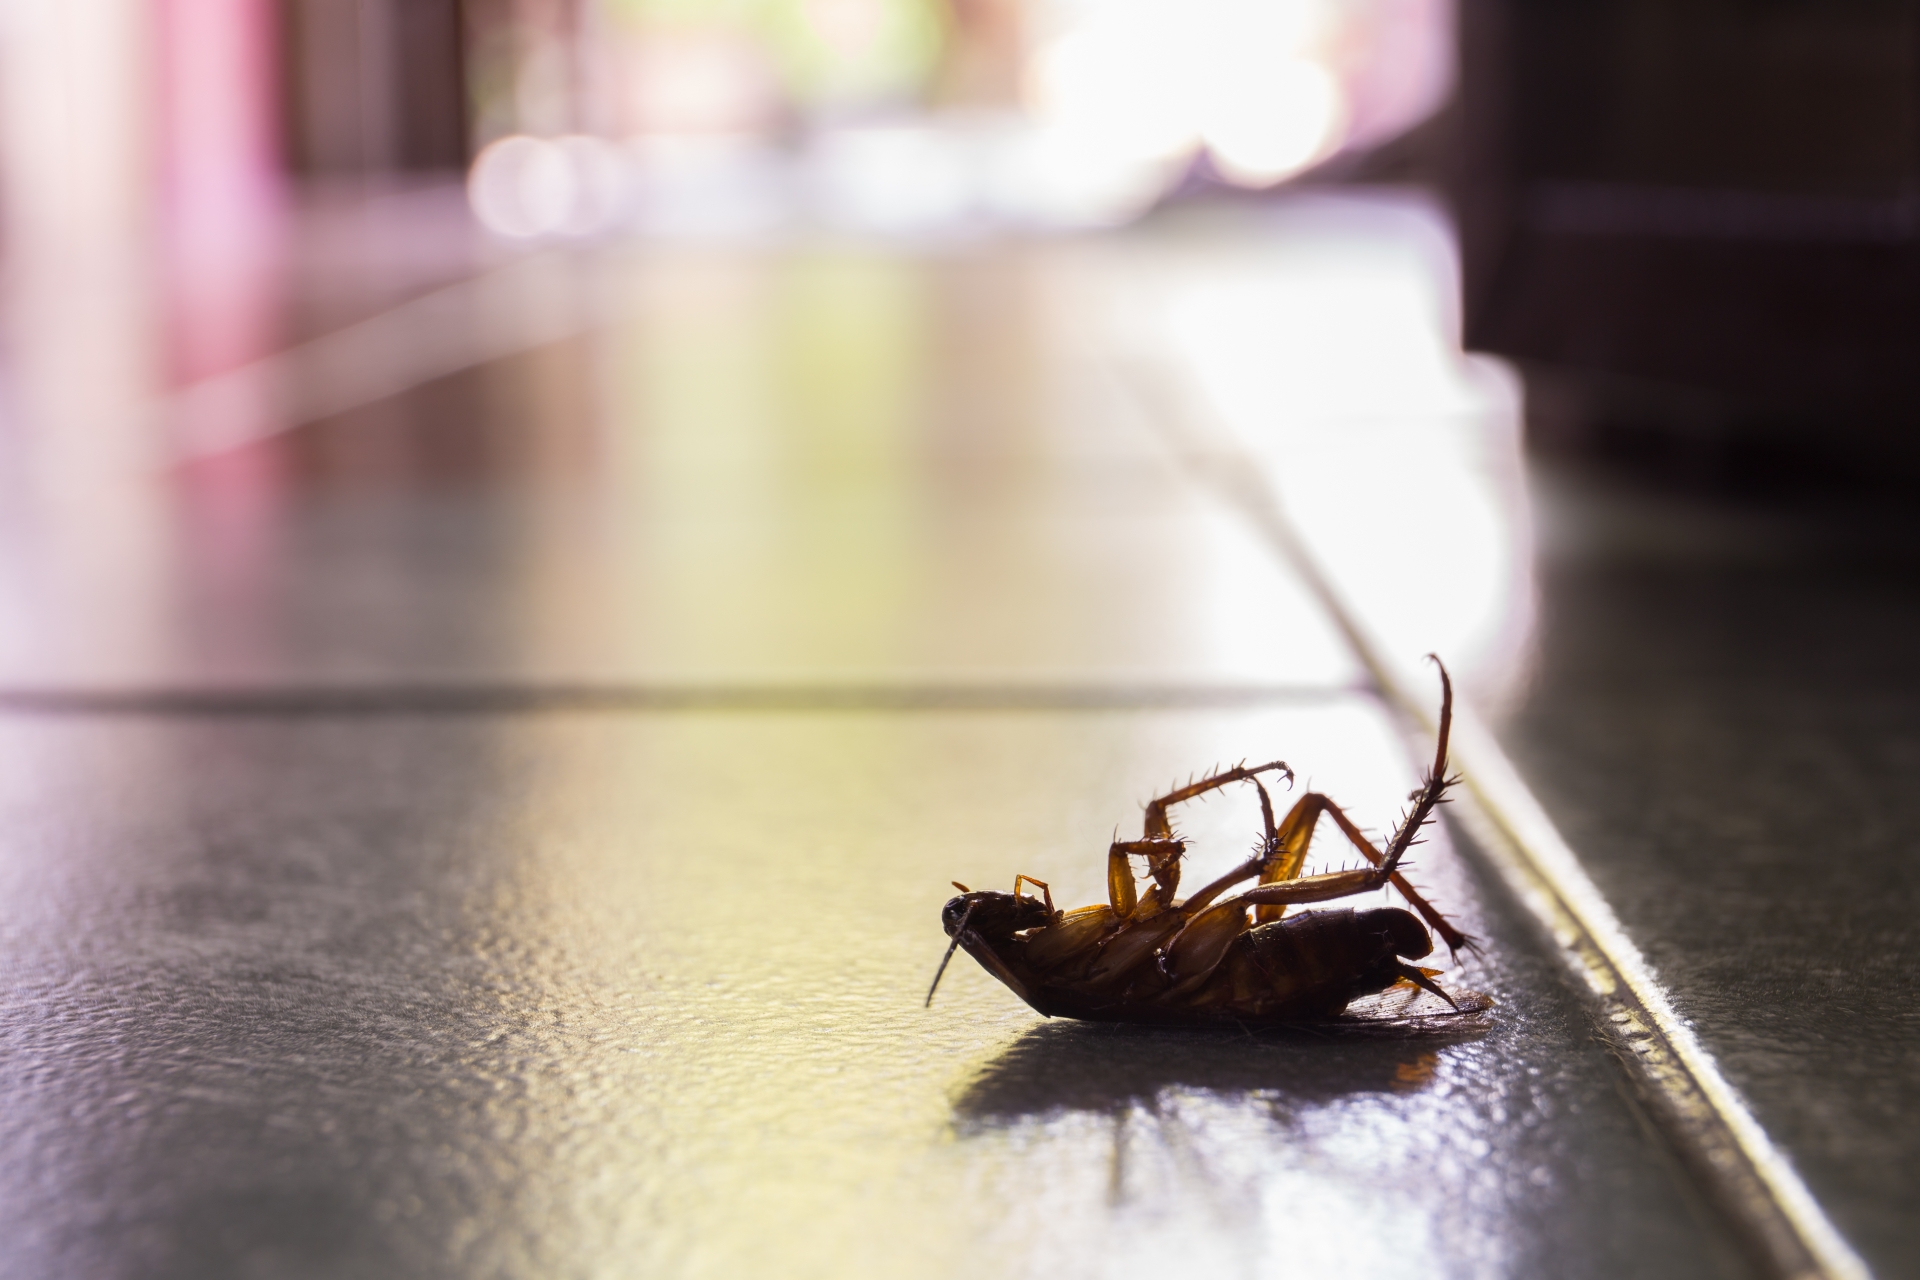 Cockroach Control, Pest Control in Finchley Central, N3. Call Now 020 8166 9746